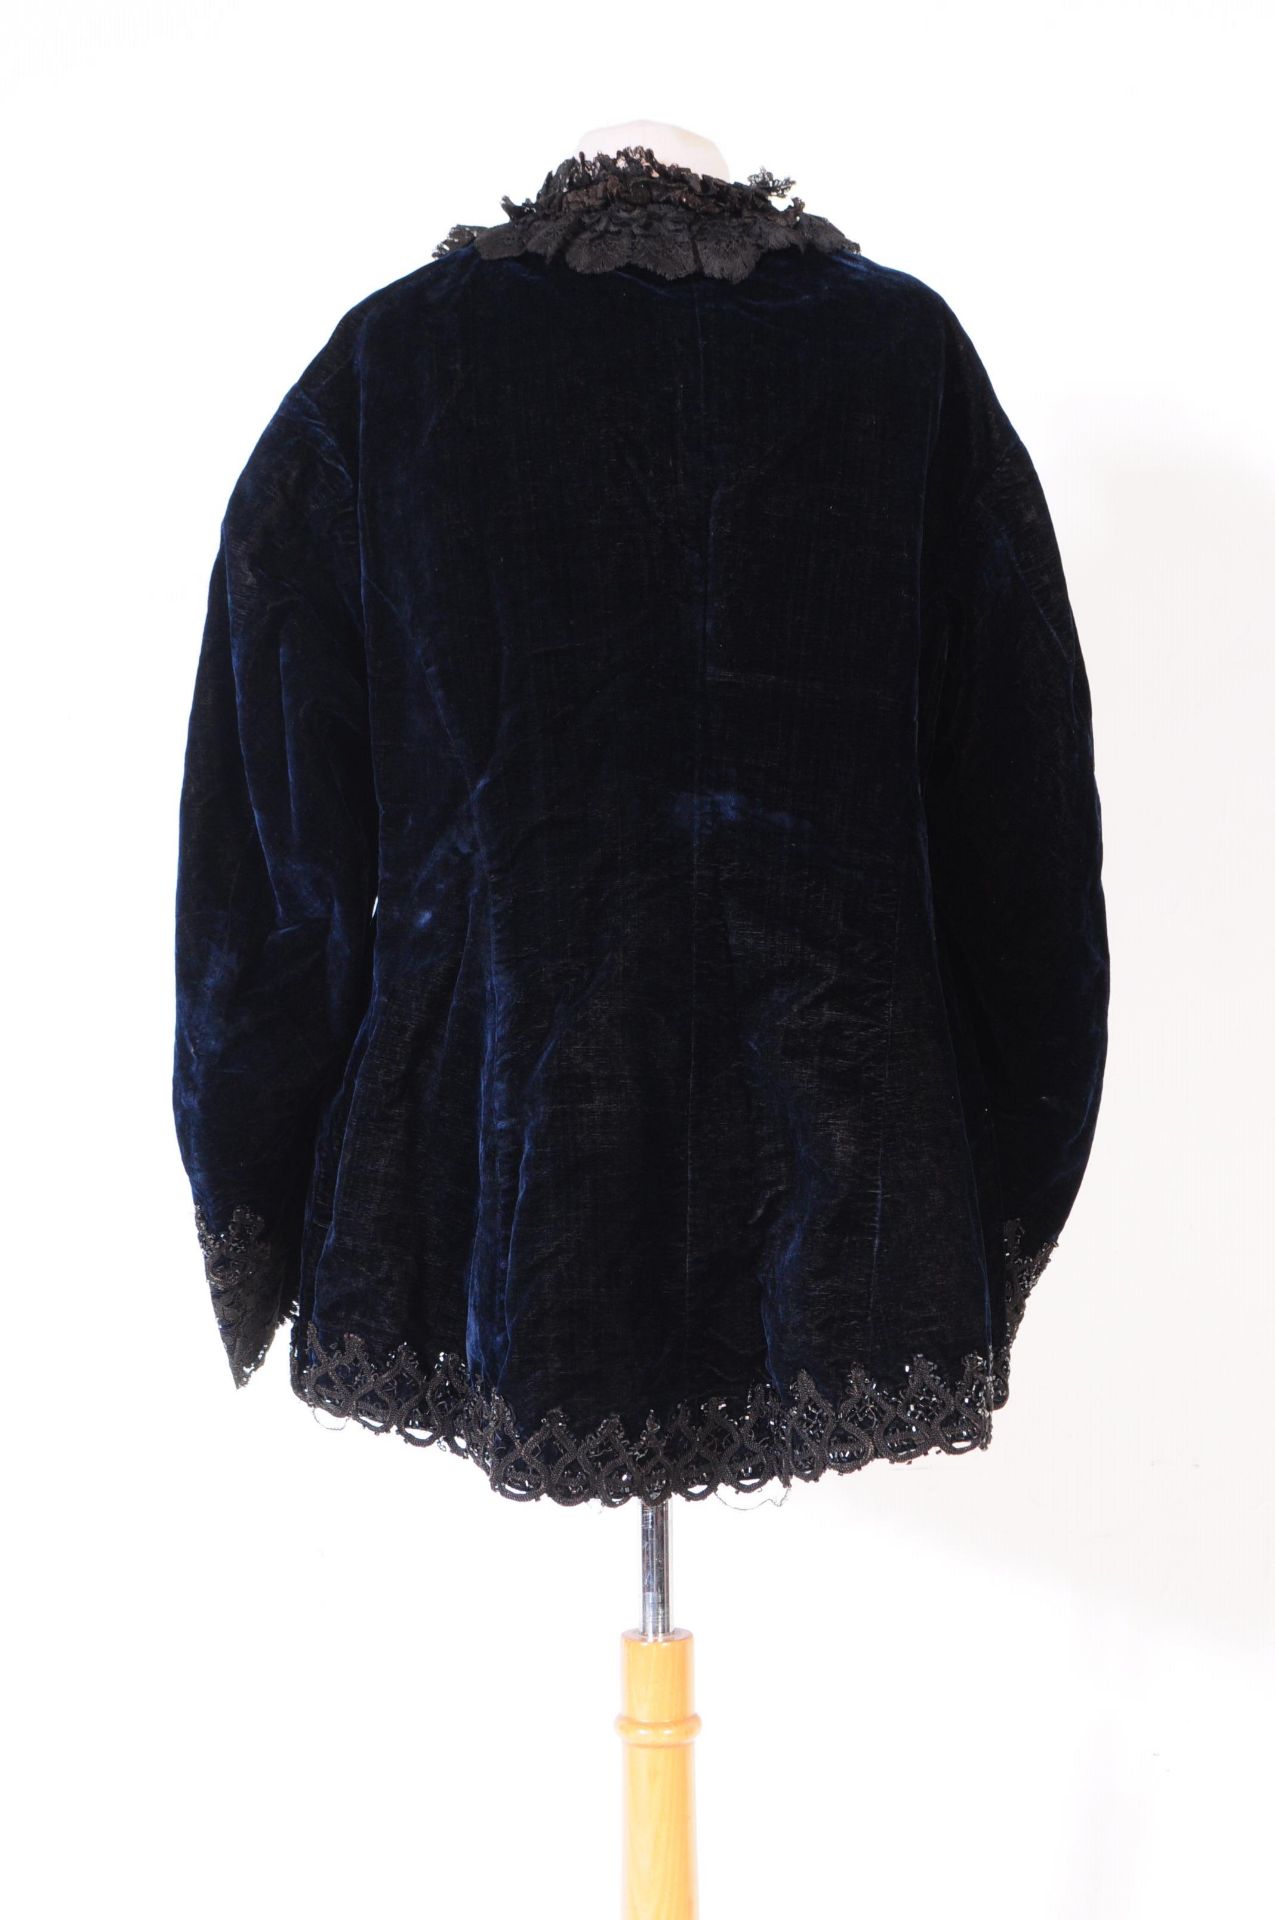 TWO VICTORIAN CLOTHING ITEMS - VELVET CAPE & SHIRT - Image 4 of 12